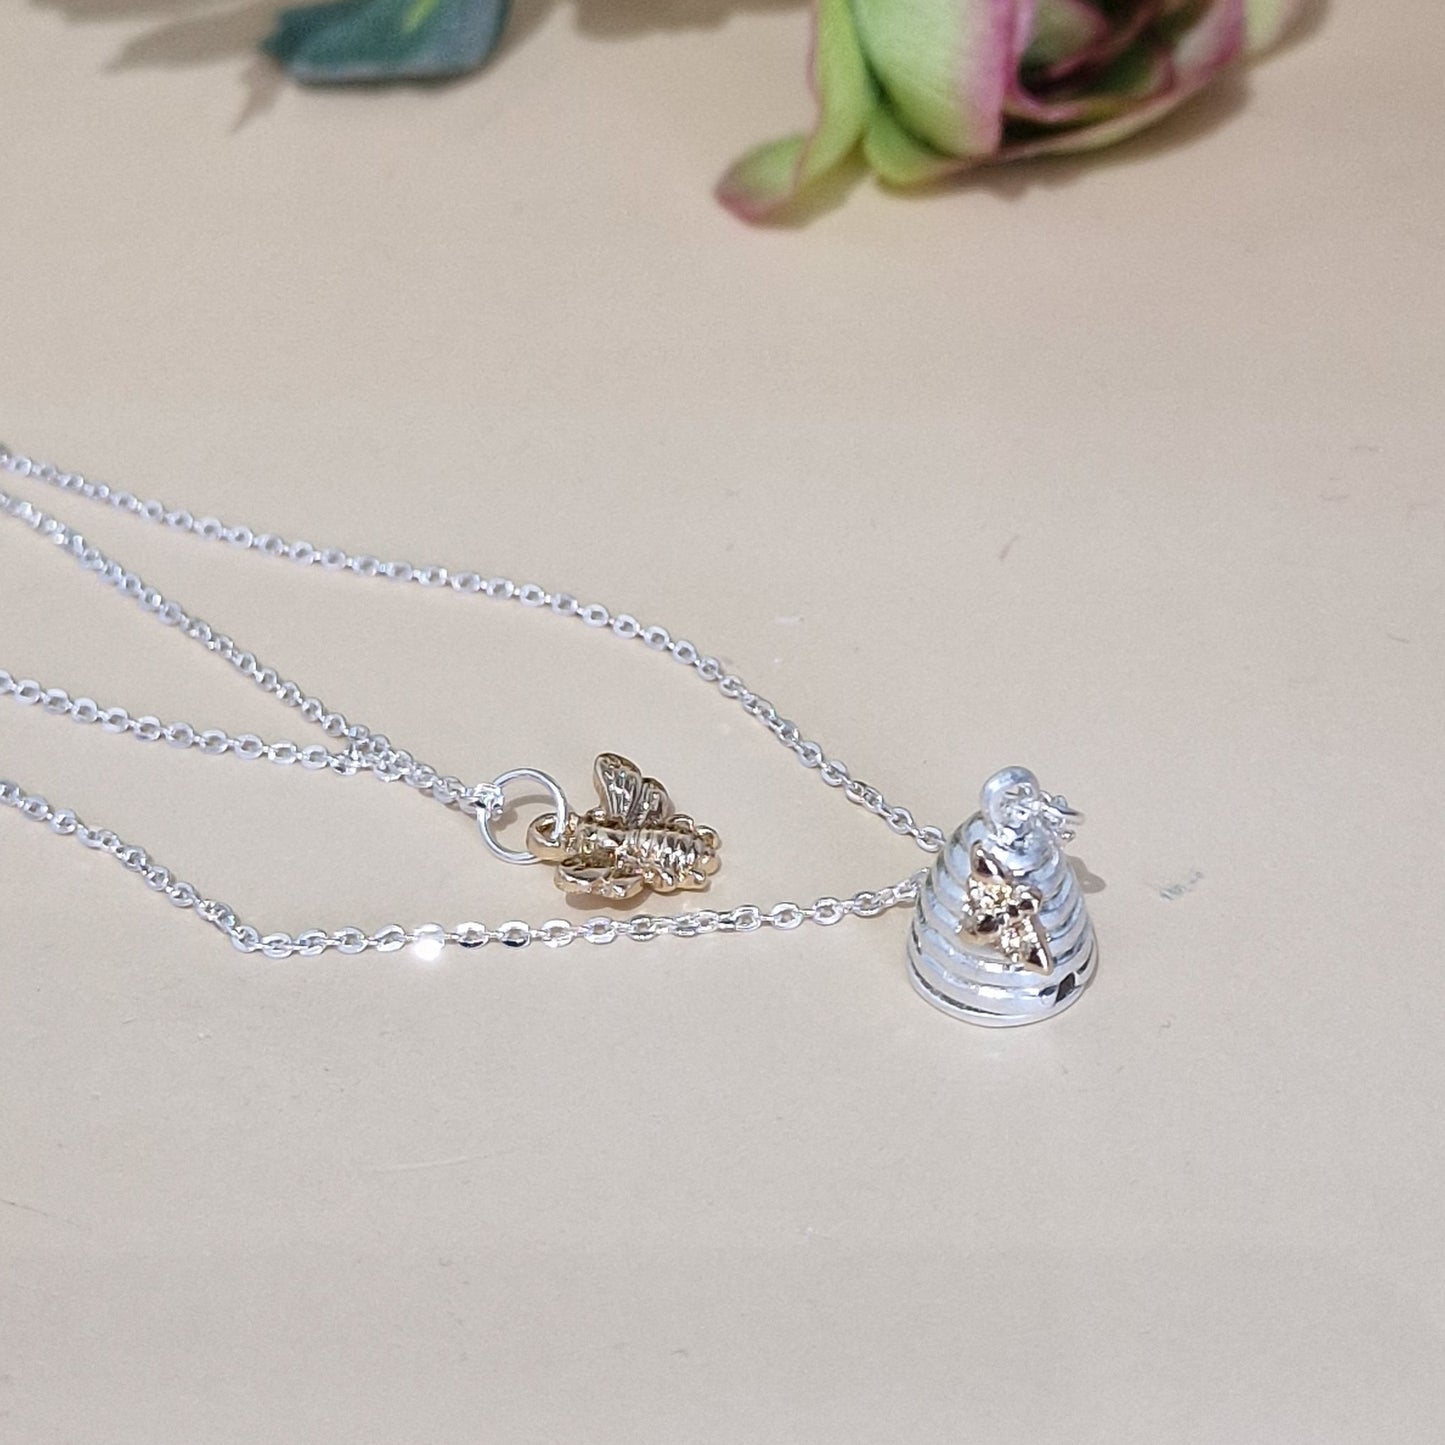 Delicate Layered Honey Bee with Beehive Necklace by POM